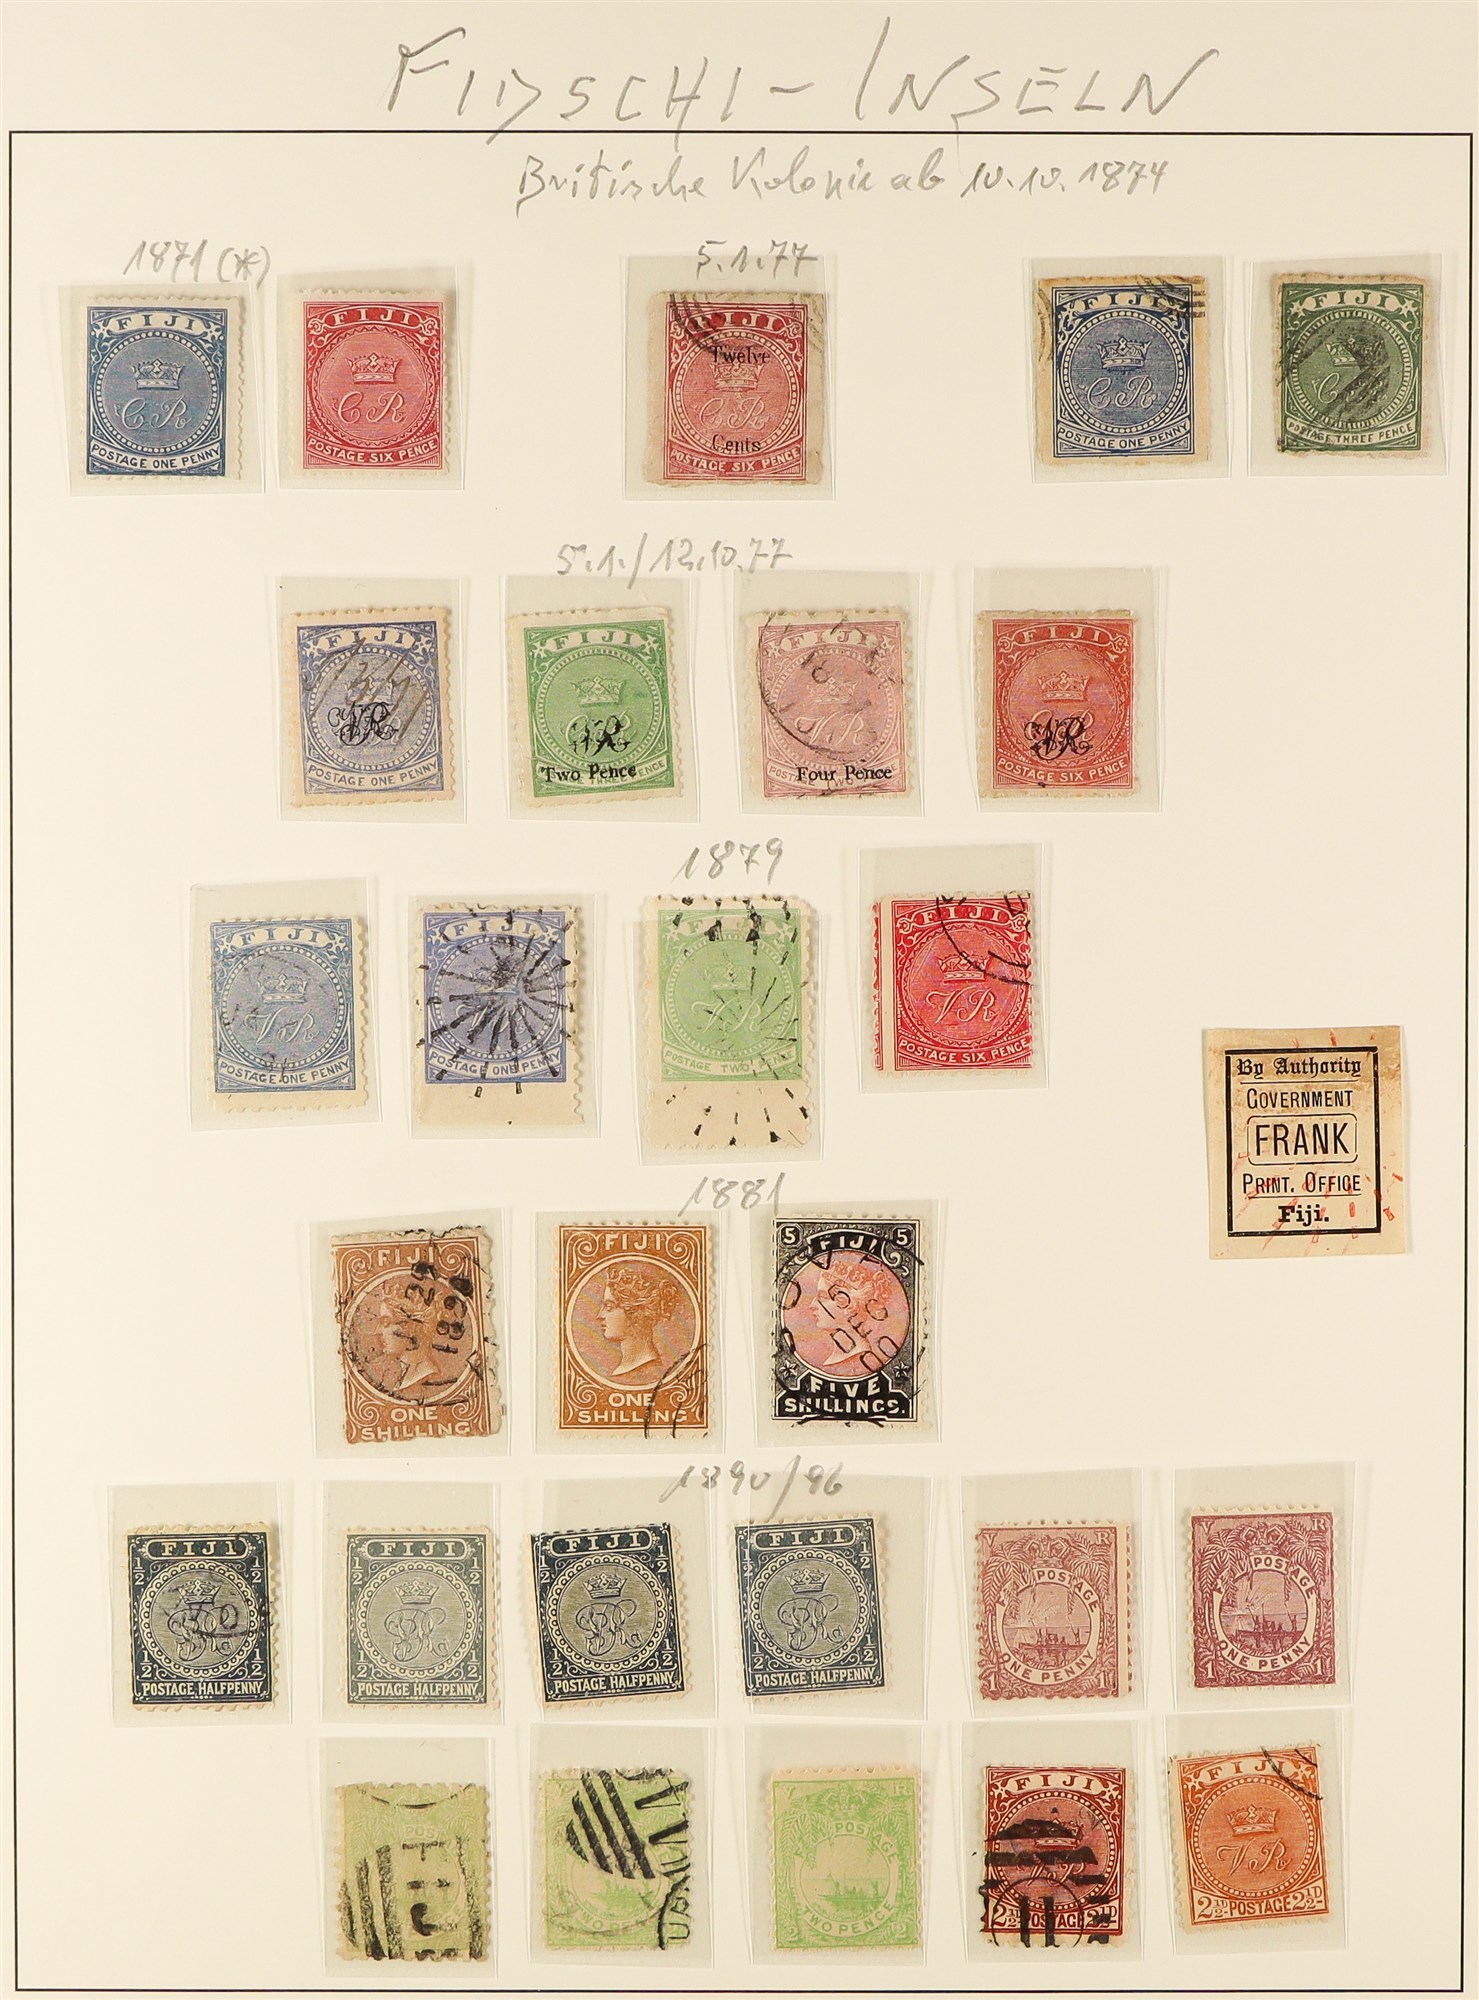 FIJI 1871 - 1951 COLLECTION approx 90 mint and used stamps on album pages, note 1871 1d blue, 6d